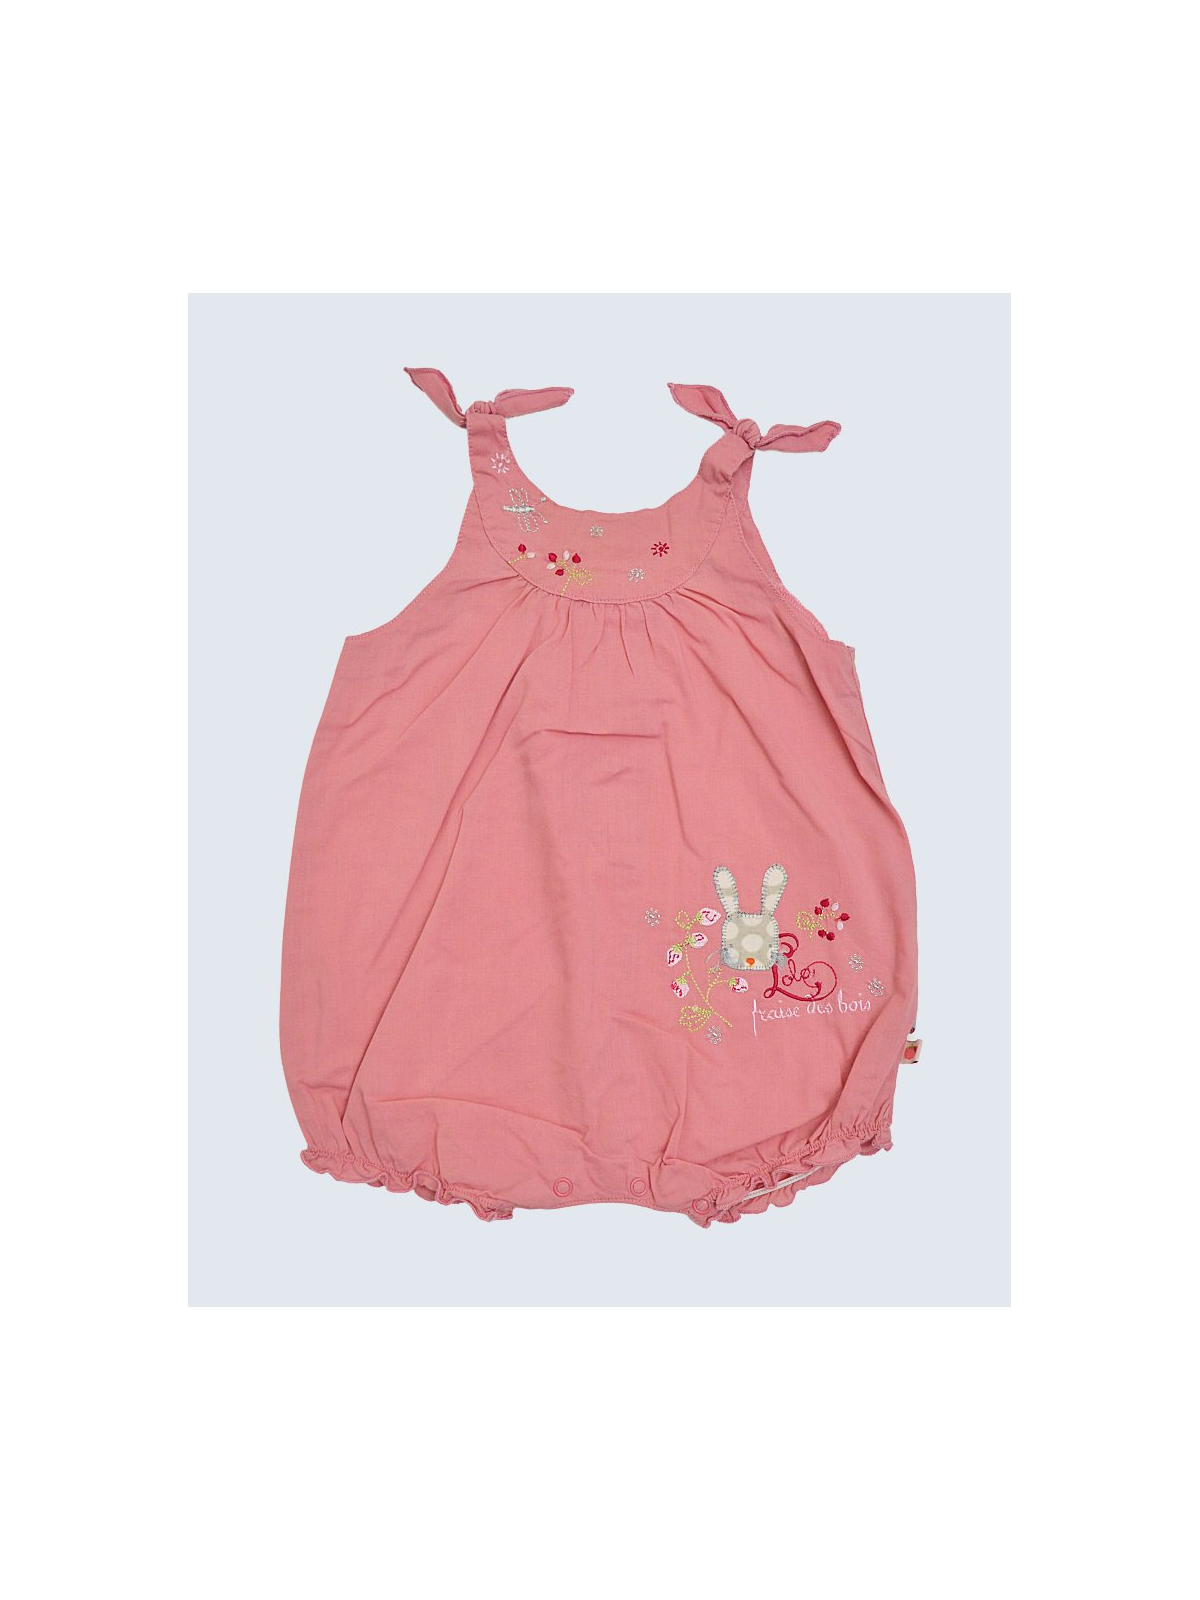 Robe d'occasion Absorba 9 Mois pour fille.